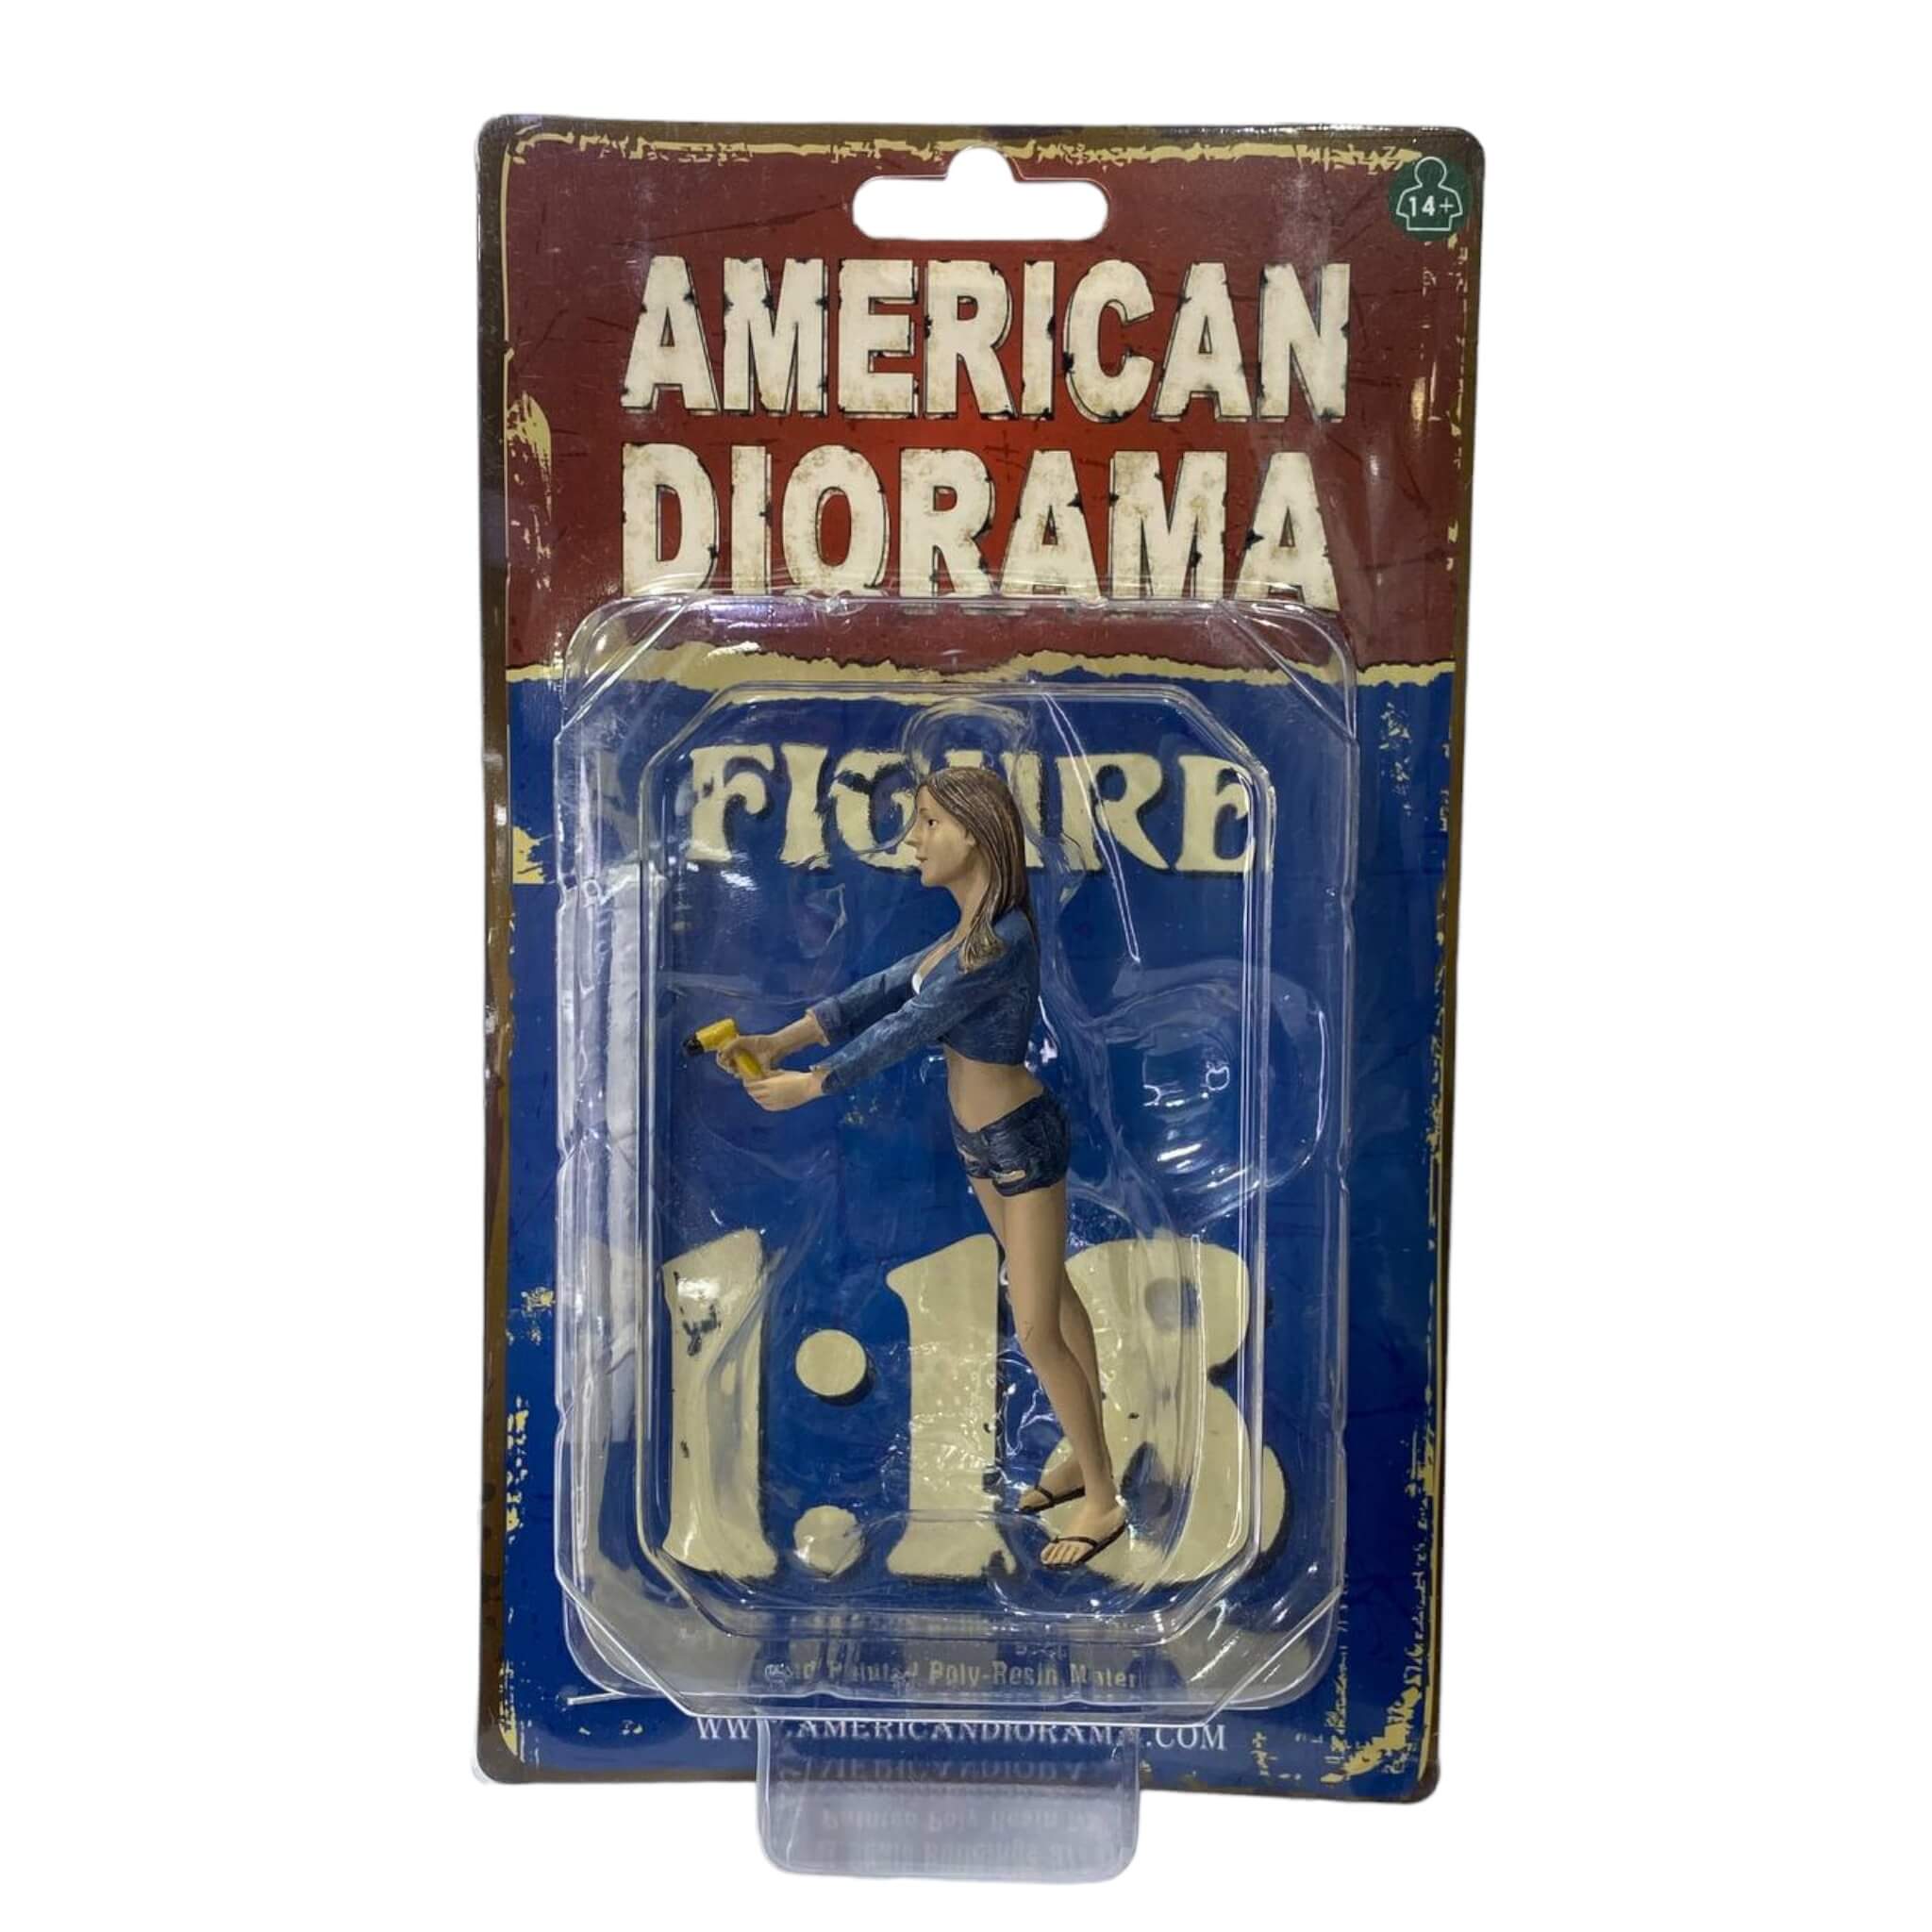 Hanging Out 2 Rasa Miniature Figure by American Diorama (AD-38184) –